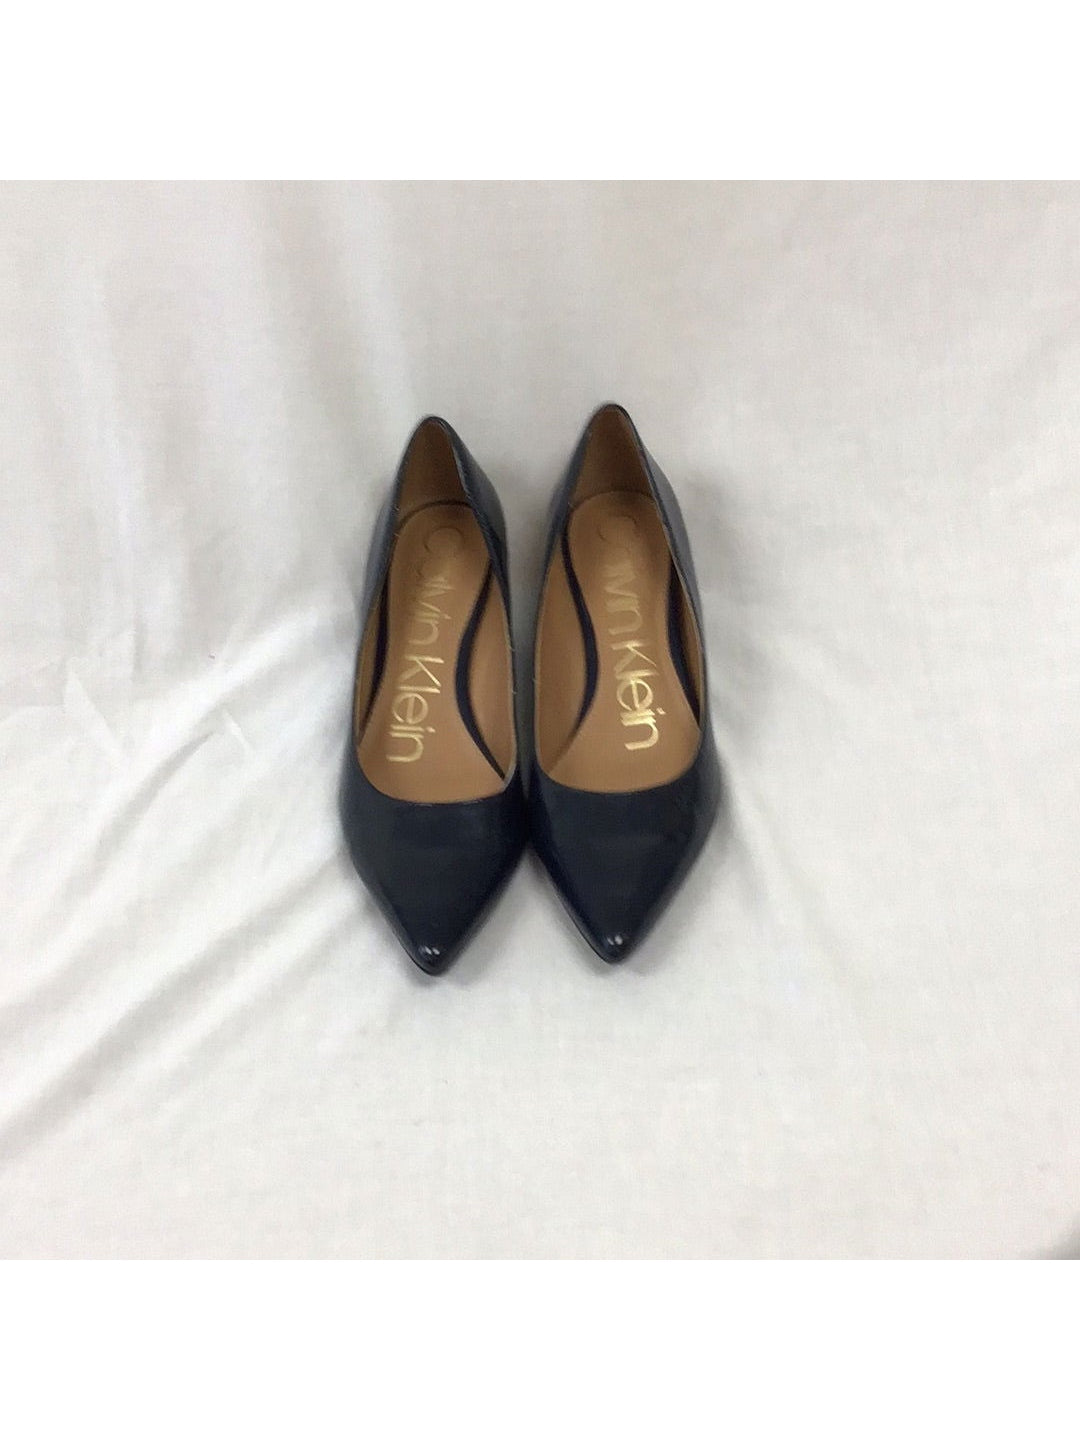 Women's Calvin Klein Dark Blue Leather Dress Shoes Size 8M - The Kennedy Collective Thrift - 